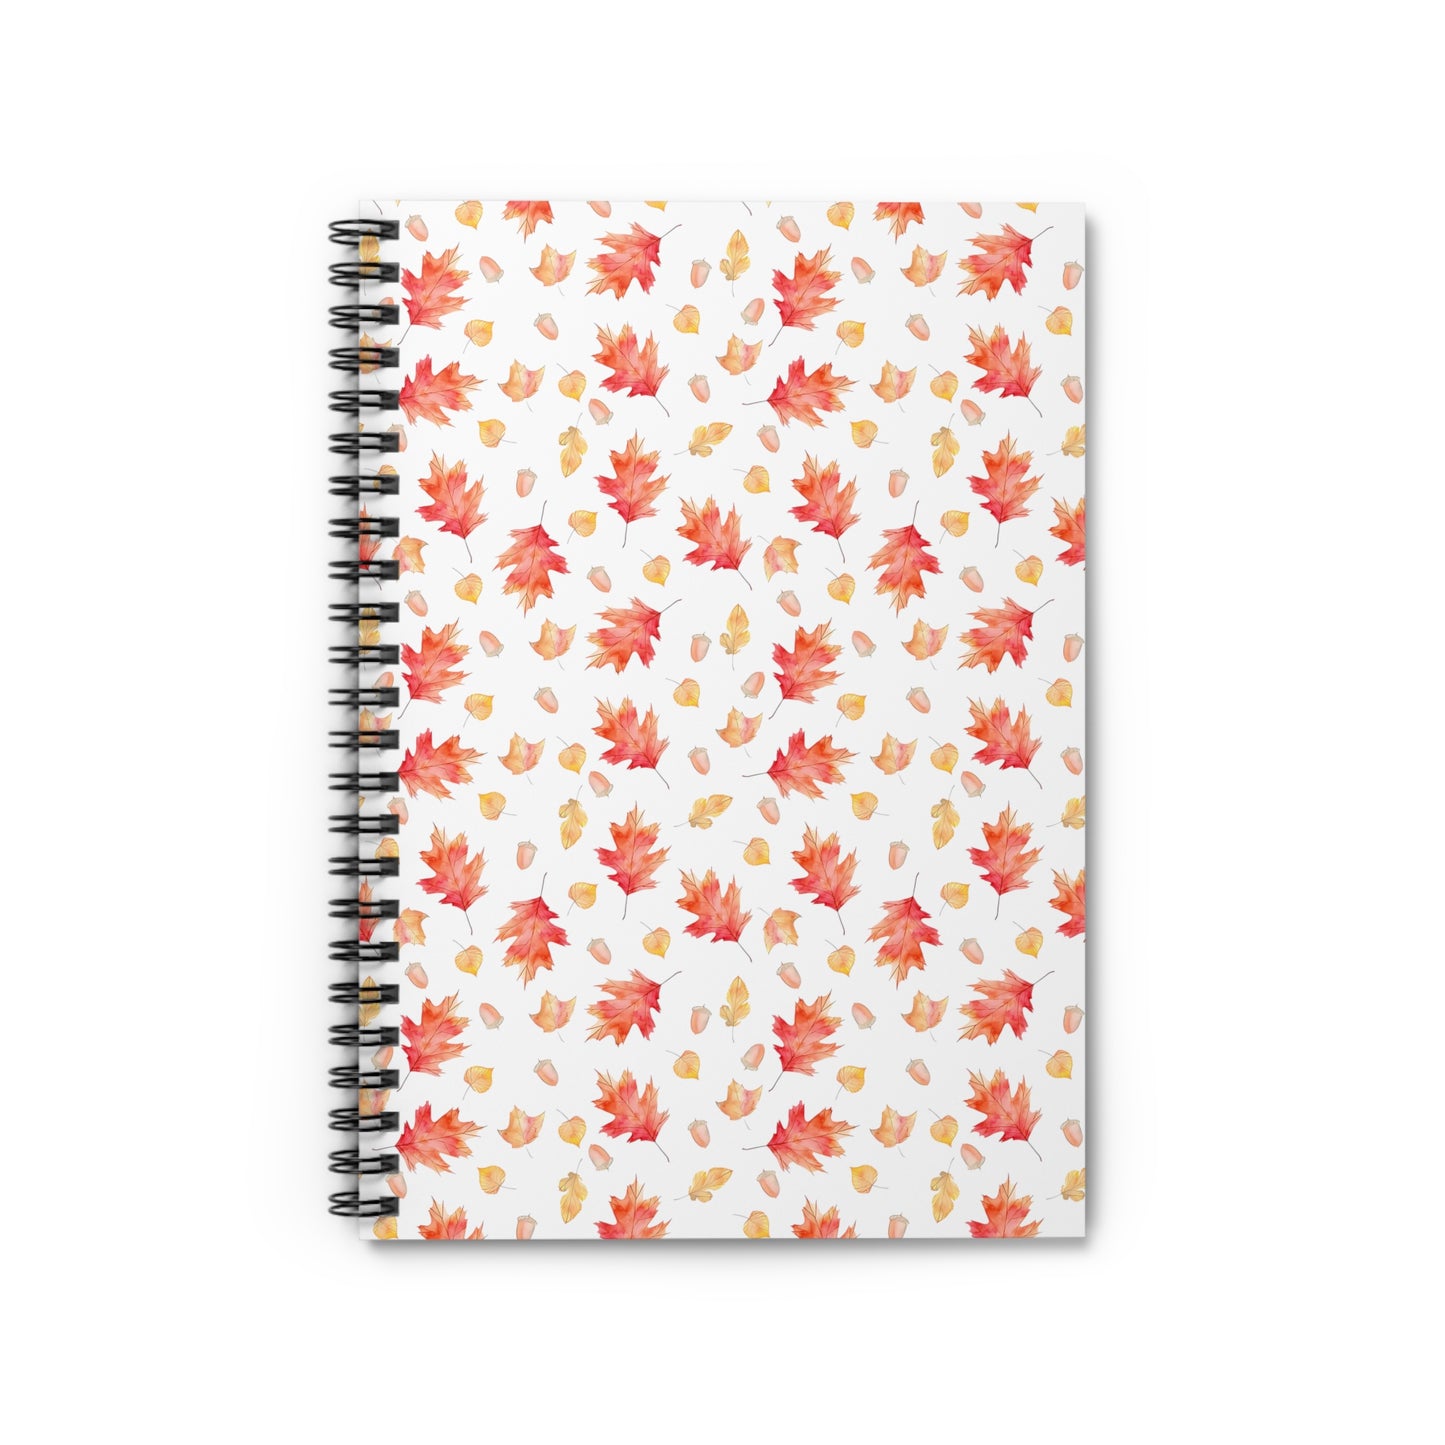 Autumn Leaves & Acorn Spiral Notebook - Ruled Line